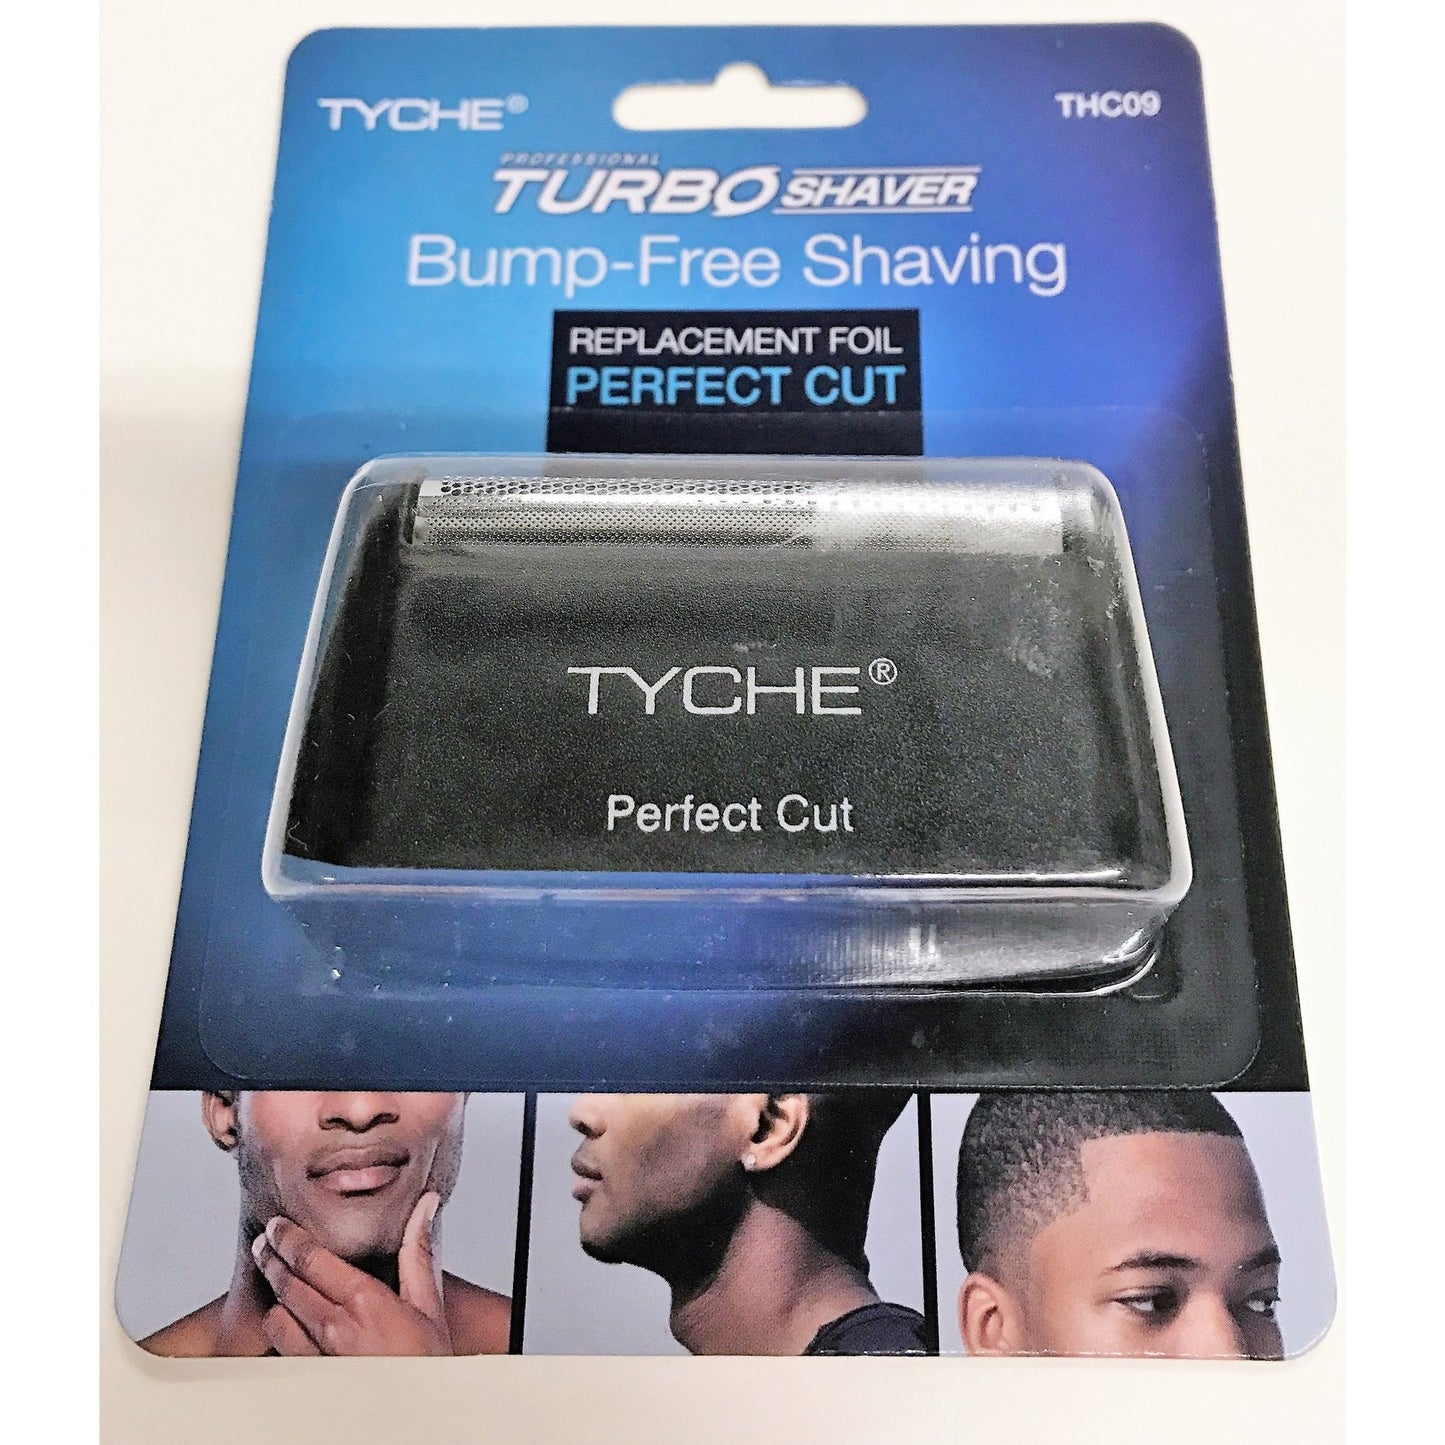 TYCHE TURBO SHAVER BUMP-FREE SHAVING REPLACEMENT FOIL THC09